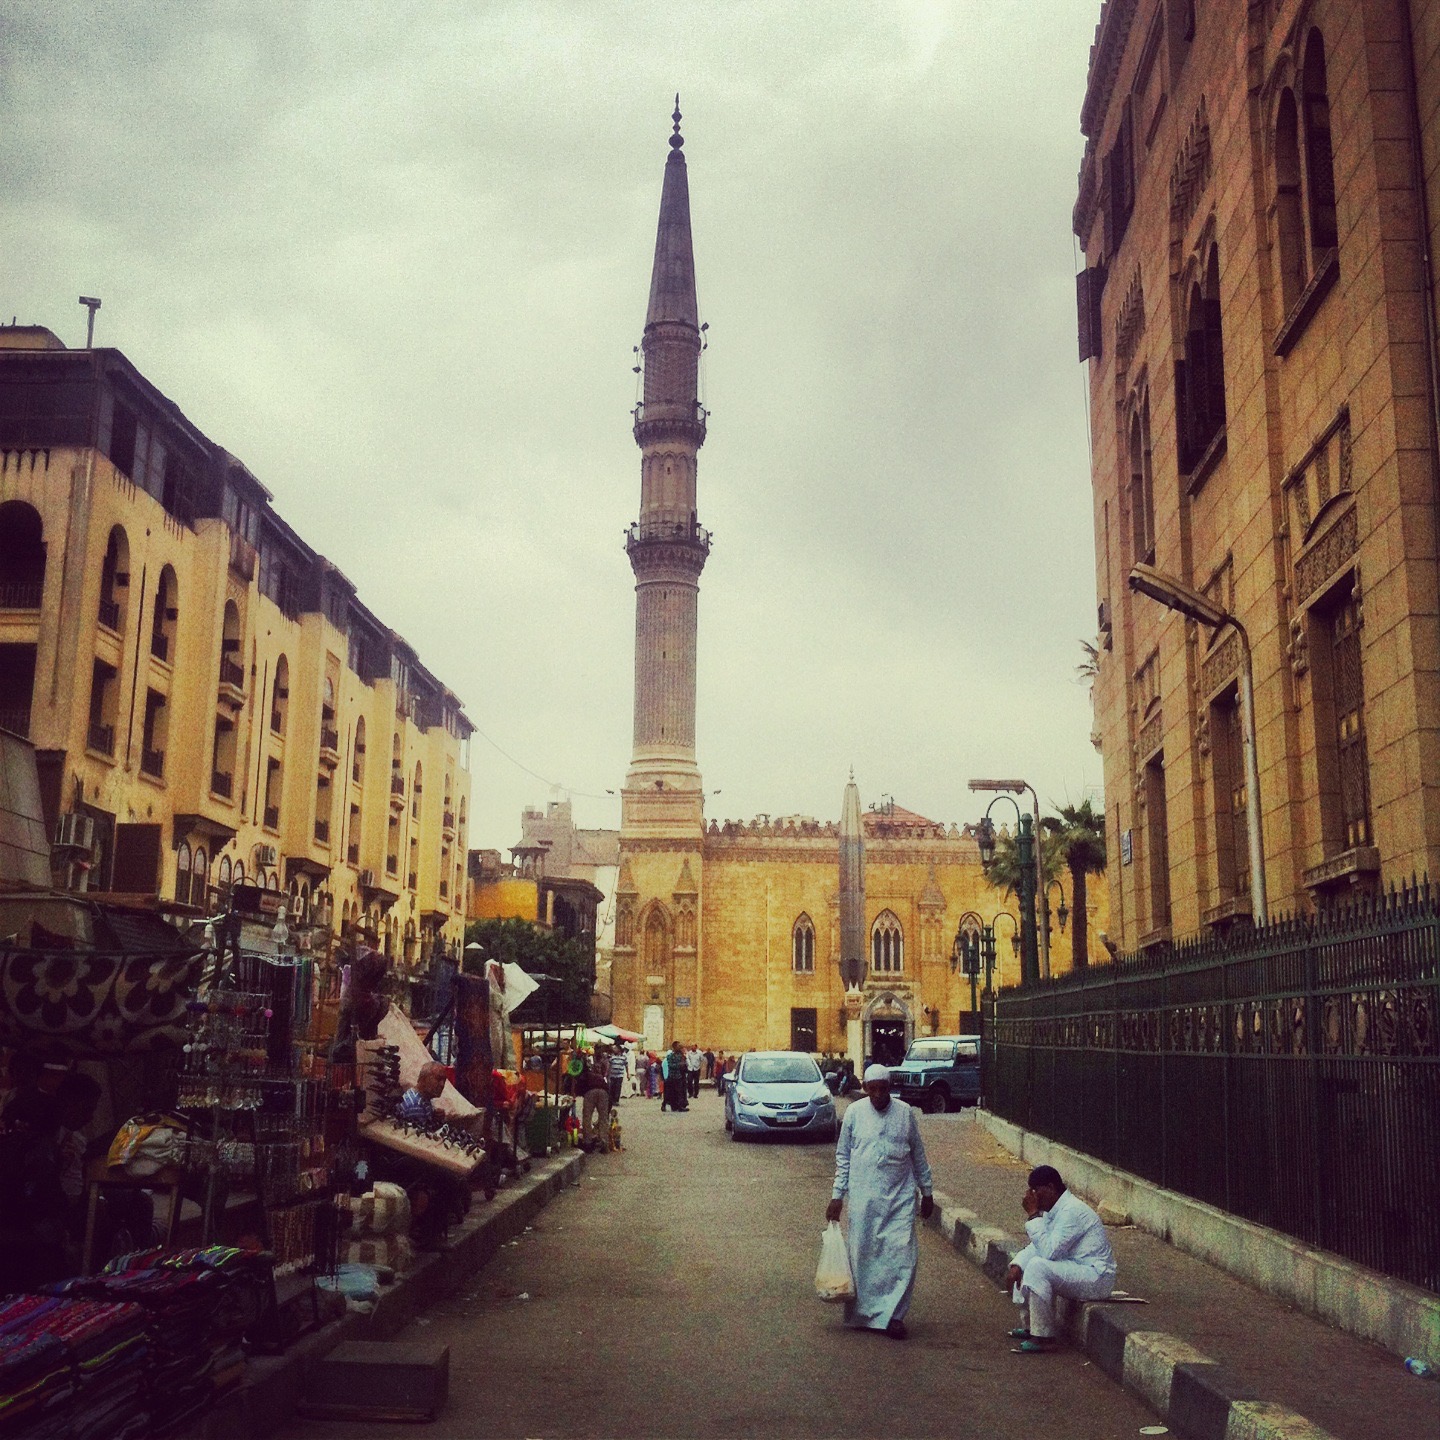  CAIRO | A man walk down from the entrance of Old Cairo. April 23, 2014. 